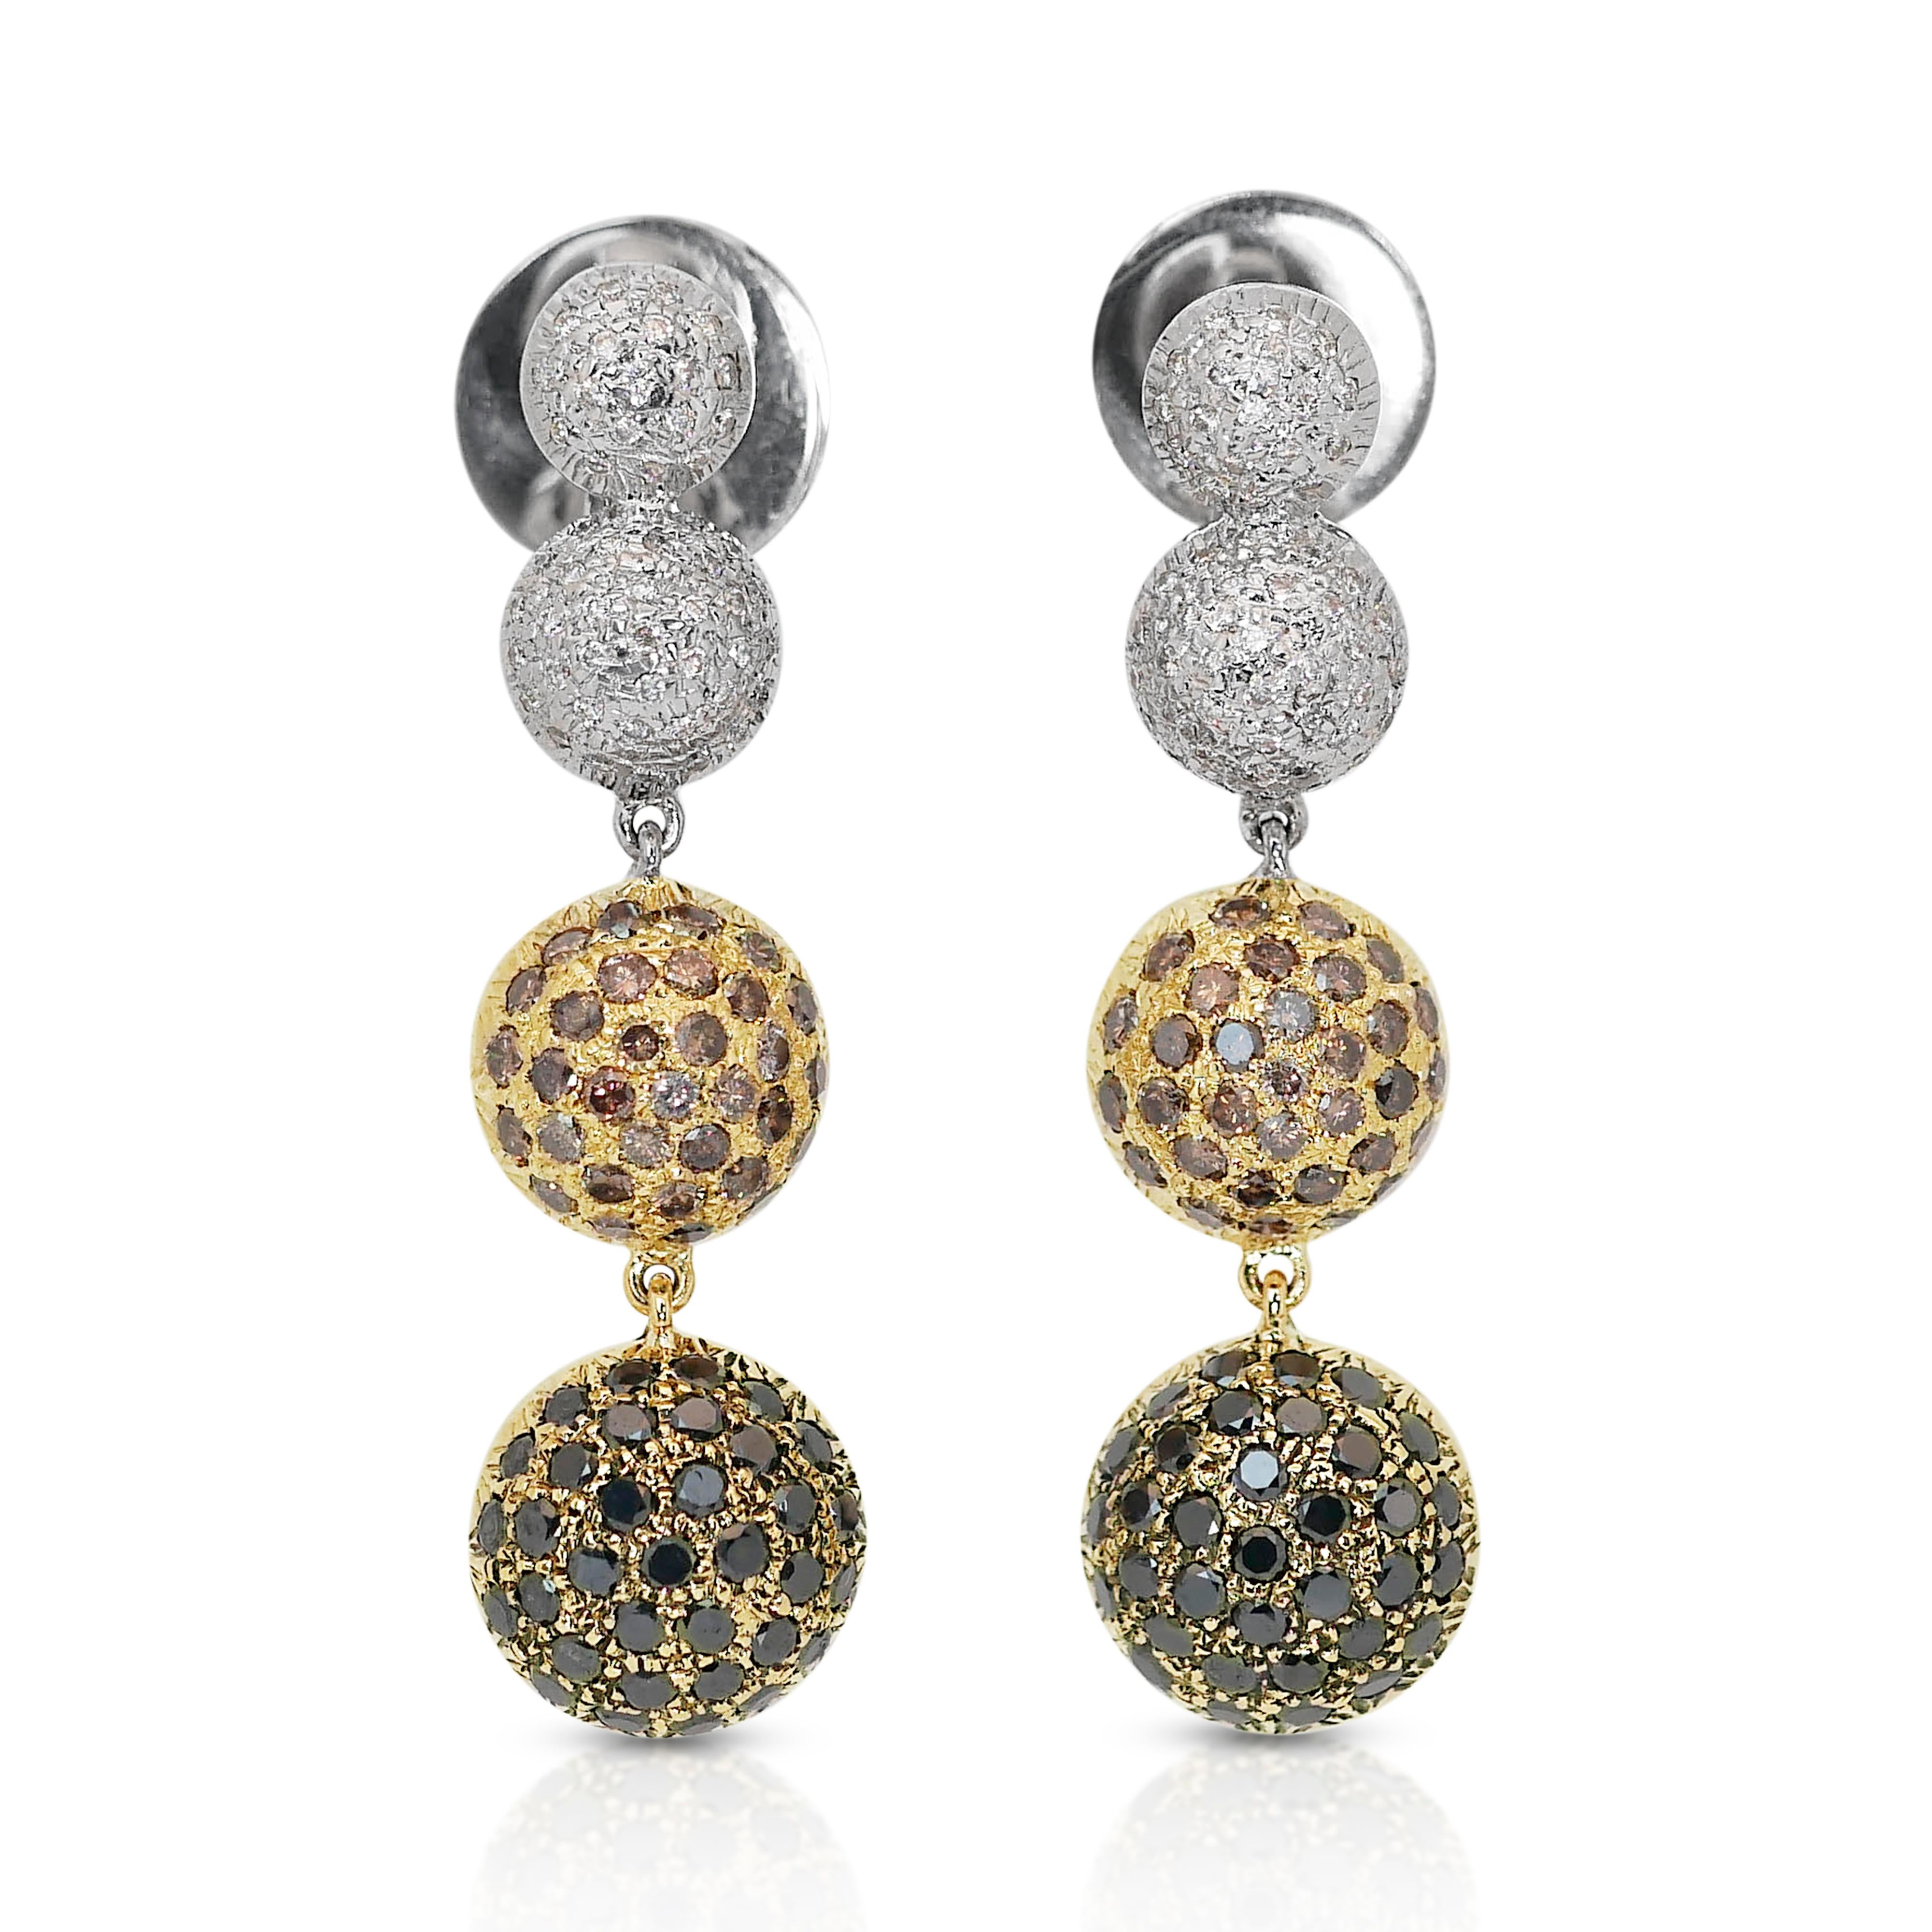 This stunning drop earrings showcases a round brilliant-cut main stone weighing 1.28 carats, featuring a striking black color. The clarity of the main stone is described as semi-translucent to opaque, adding a unique and mysterious allure to the